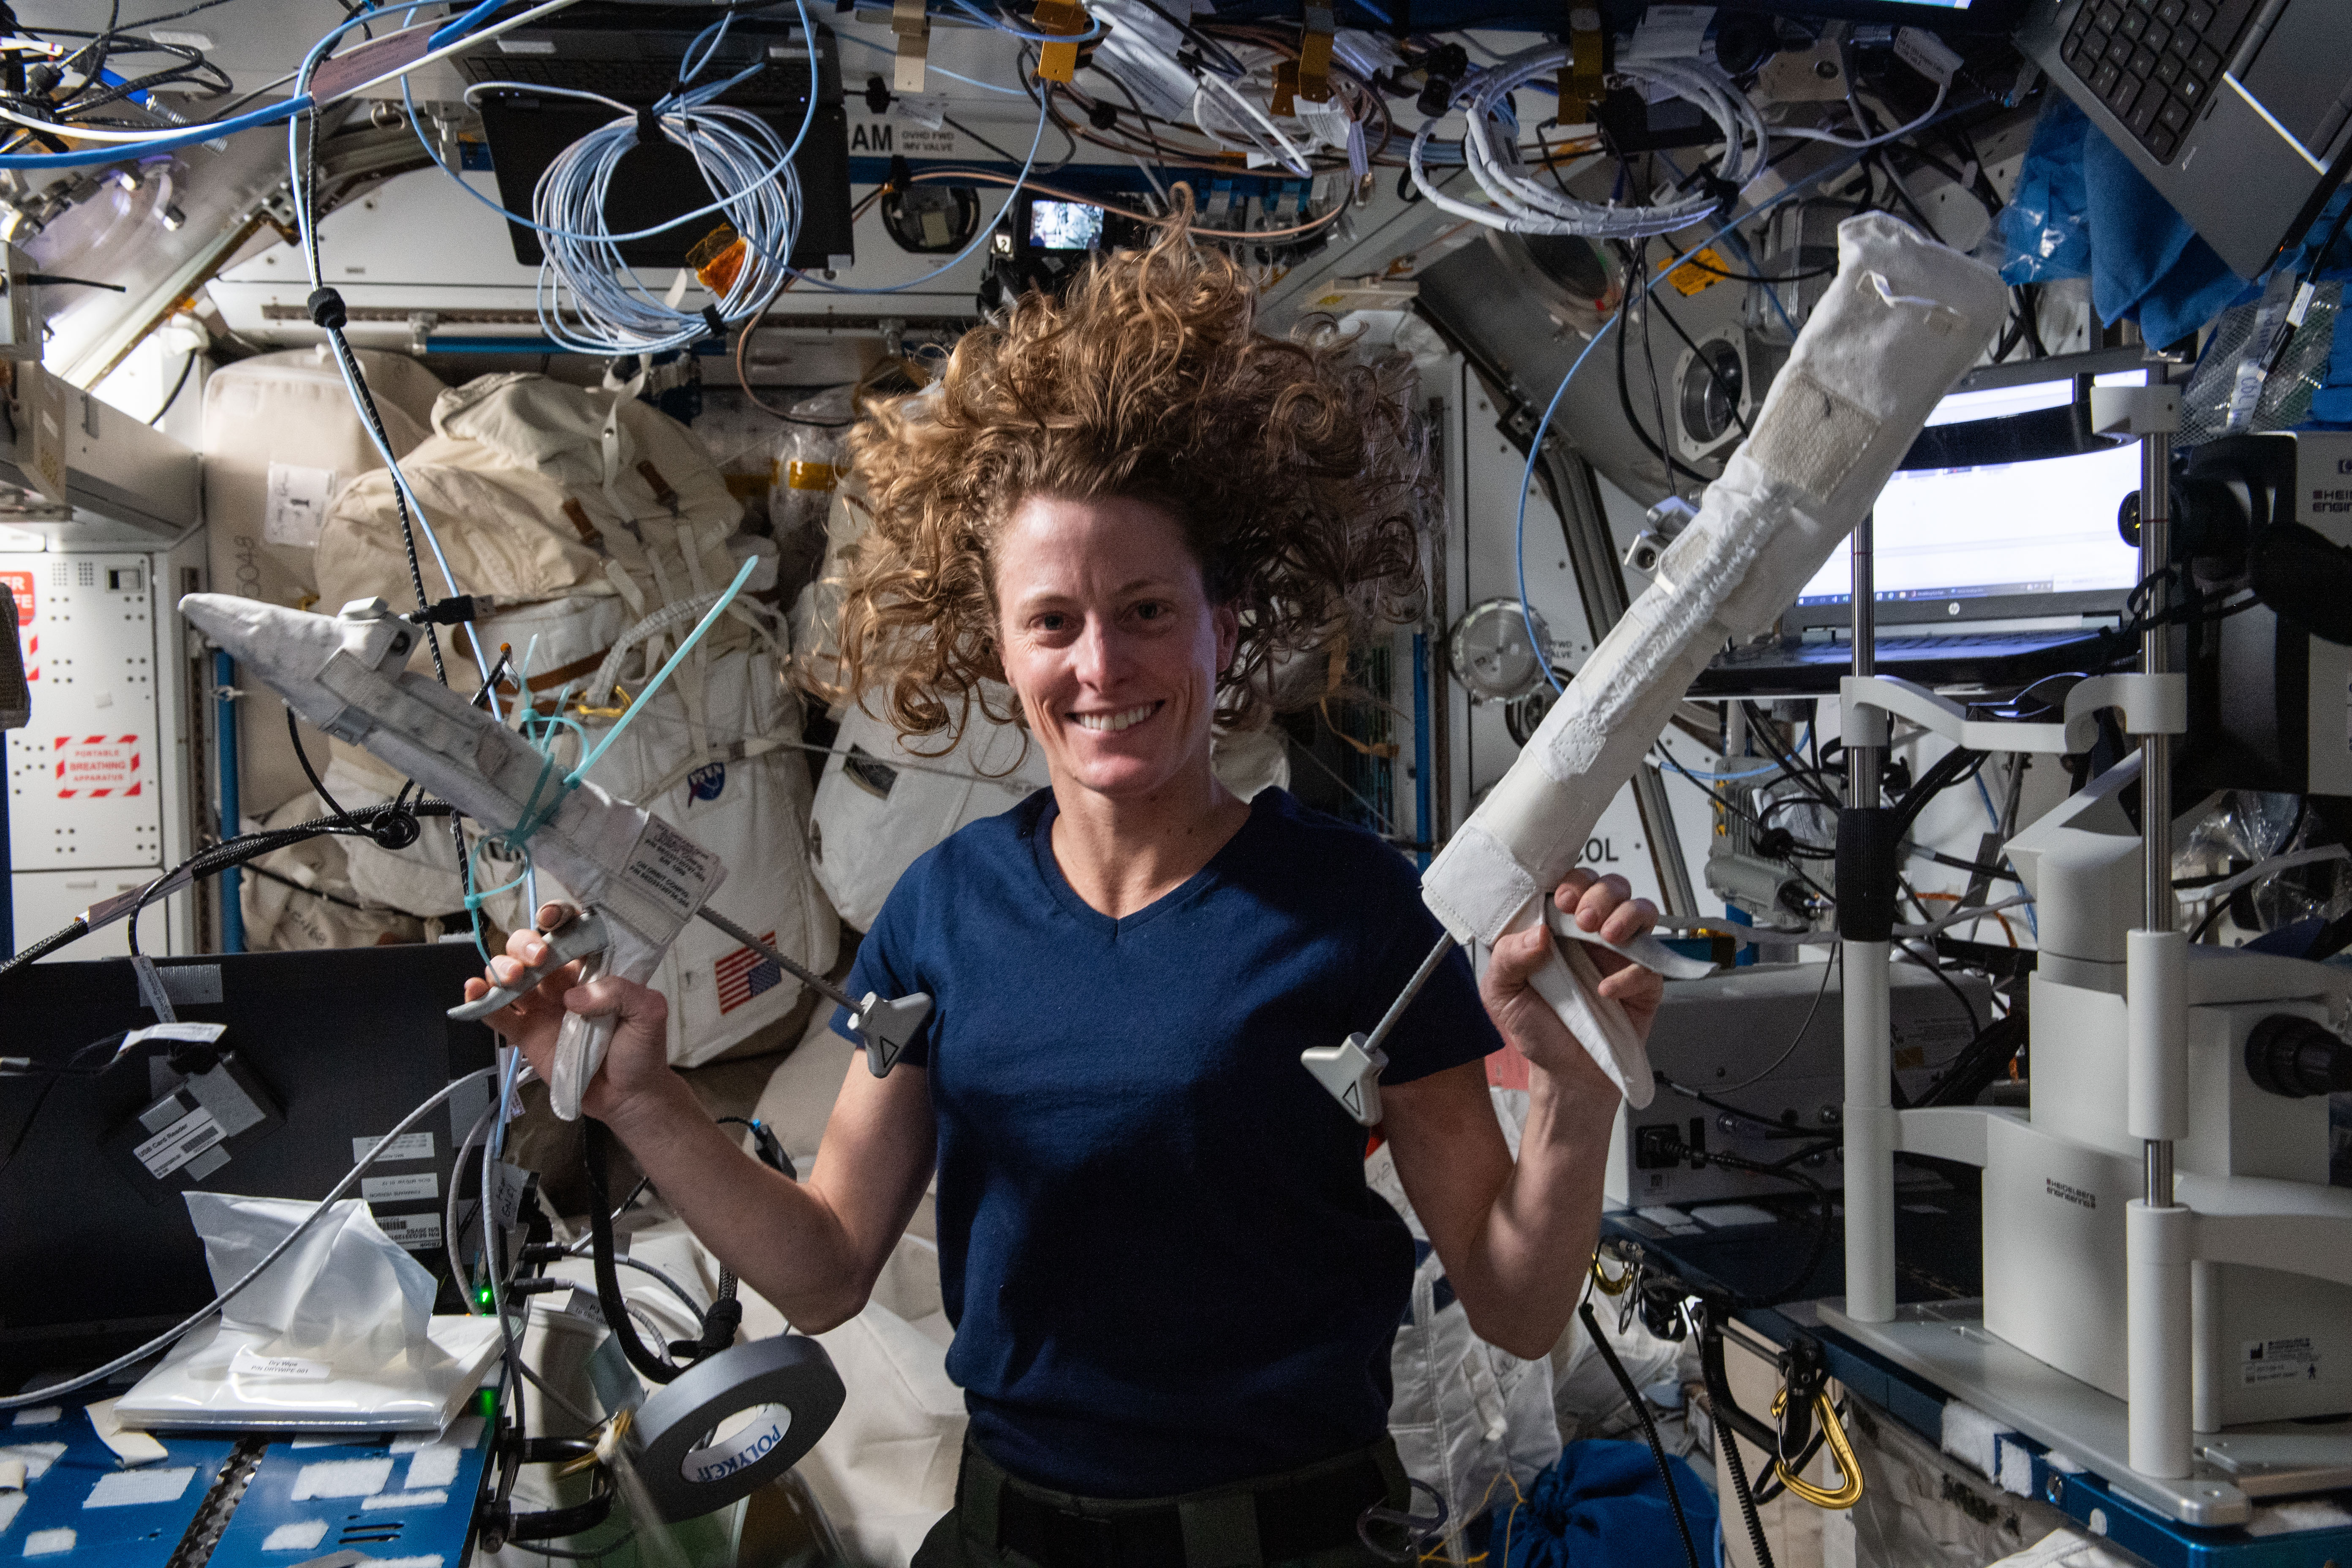 NASA astronaut and Expedition 70 Flight Engineer Loral O'Hara shows off tools she will use during a spacewalk to swab surfaces on the International Space Station and collect potential microbe samples for analysis.